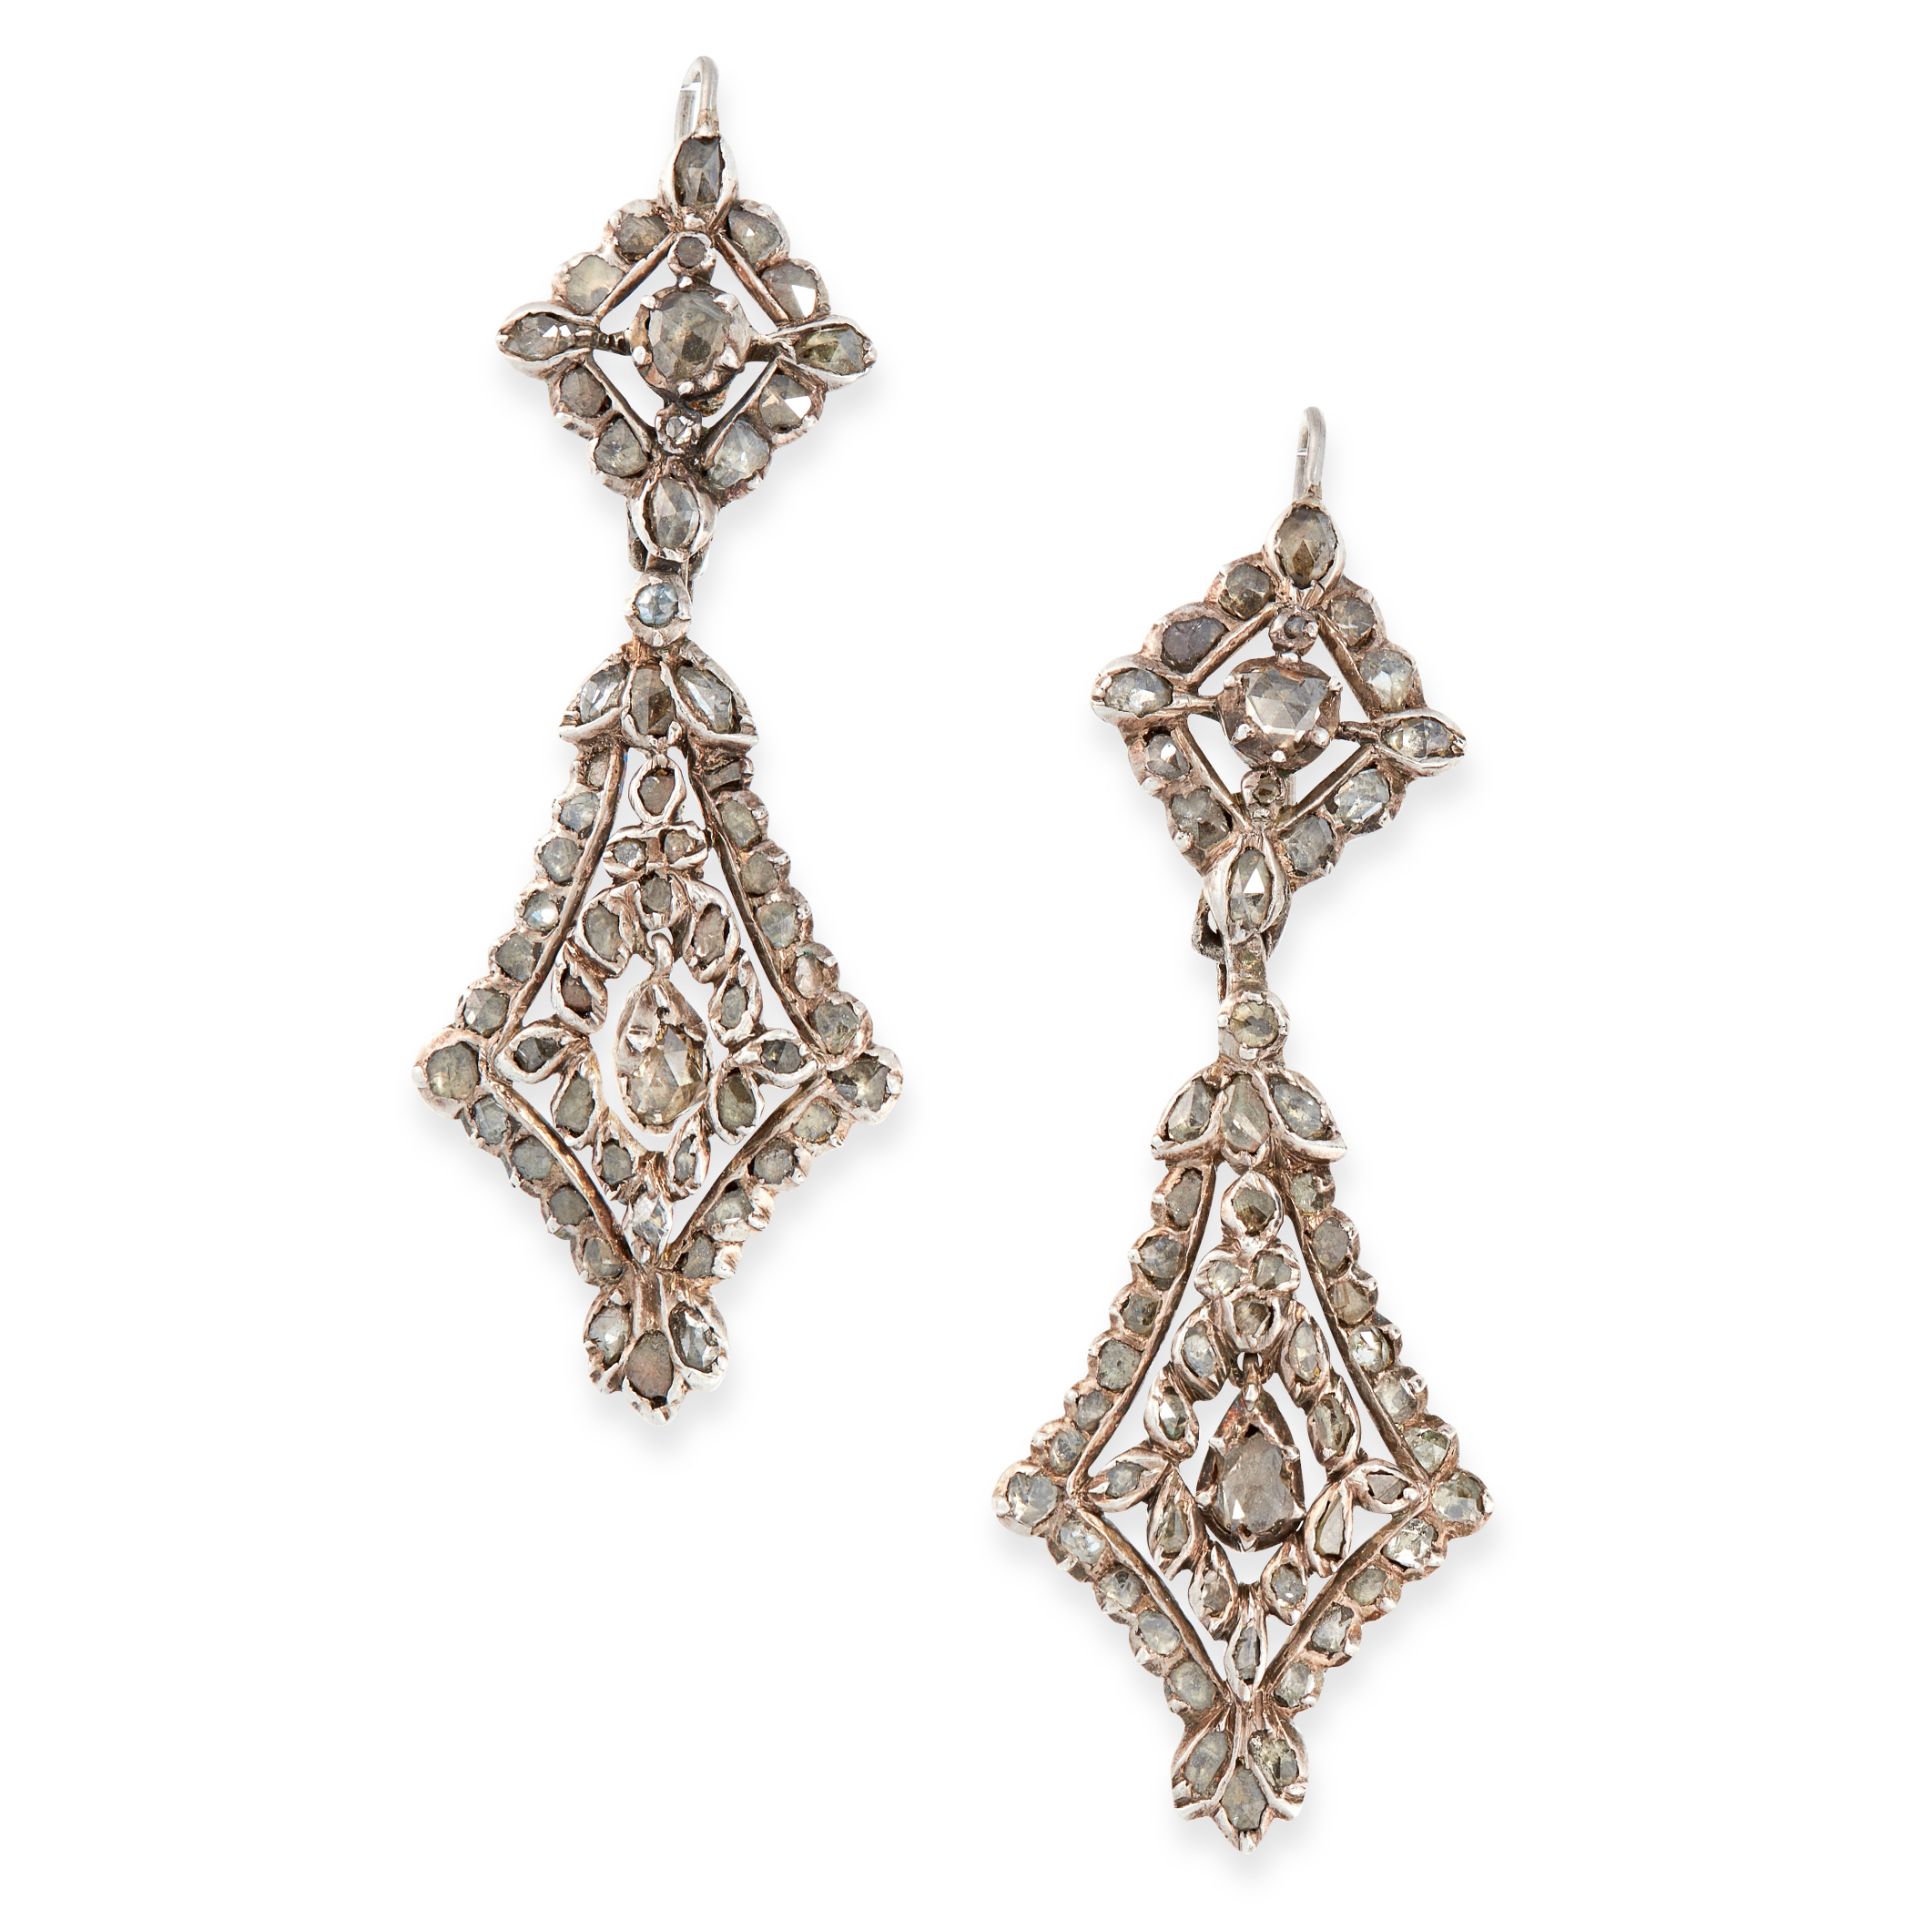 A PAIR OF ANTIQUE DIAMOND EARRINGS, CIRCA 1800 in silver, the tapering, articulated bodies set